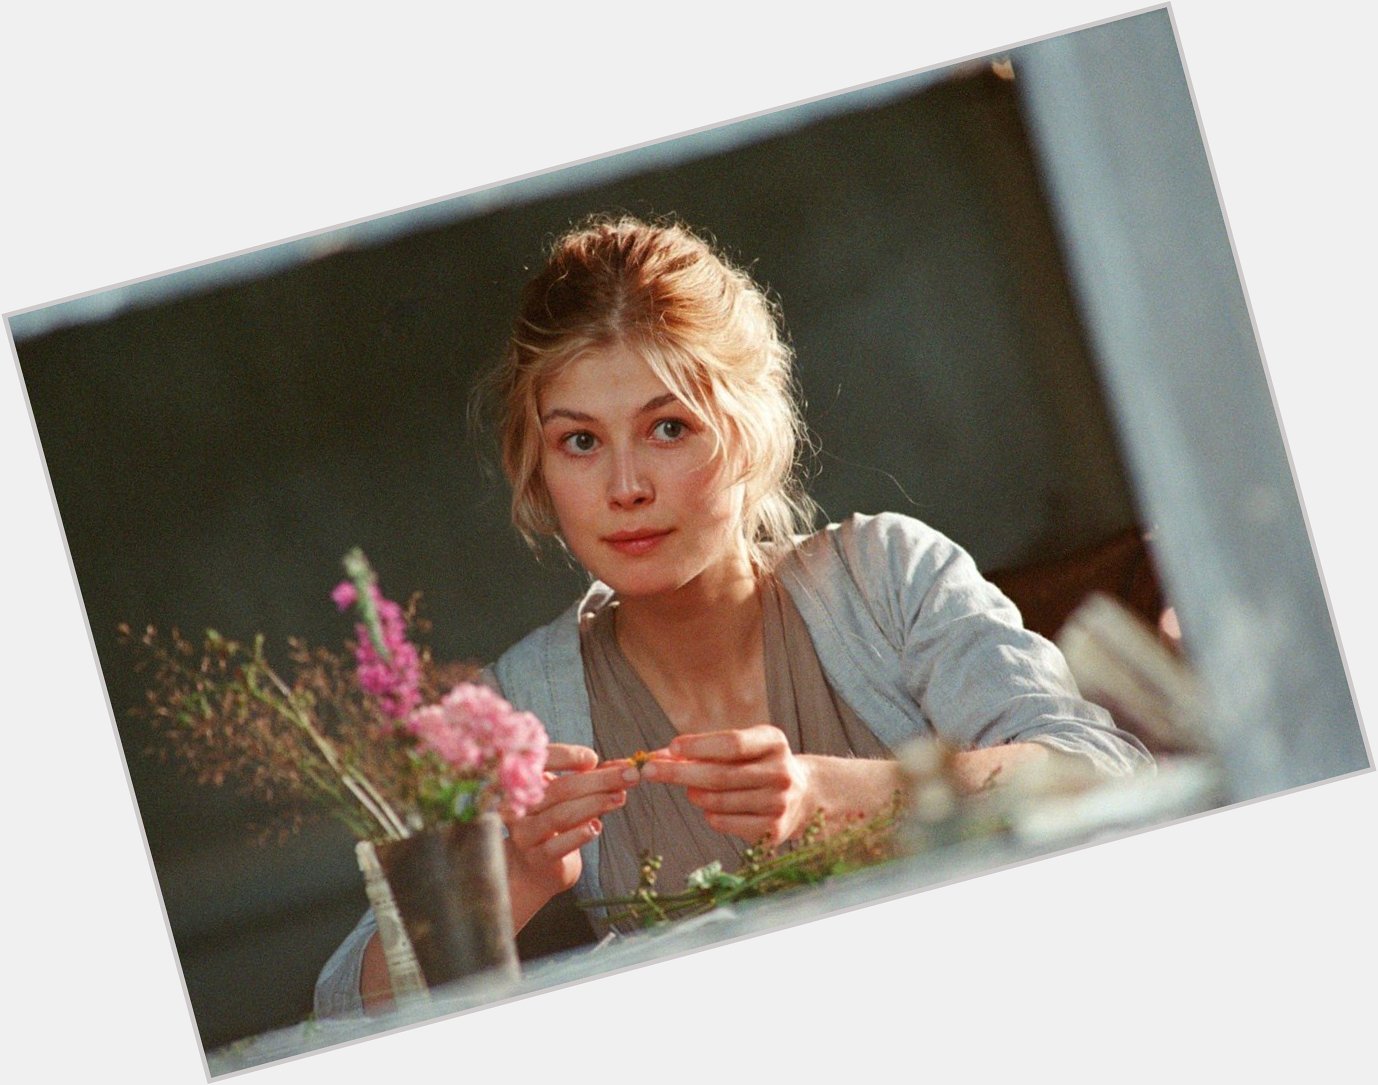 Happy birthday to rosamund pike, one of the most underrated actresses of our times 